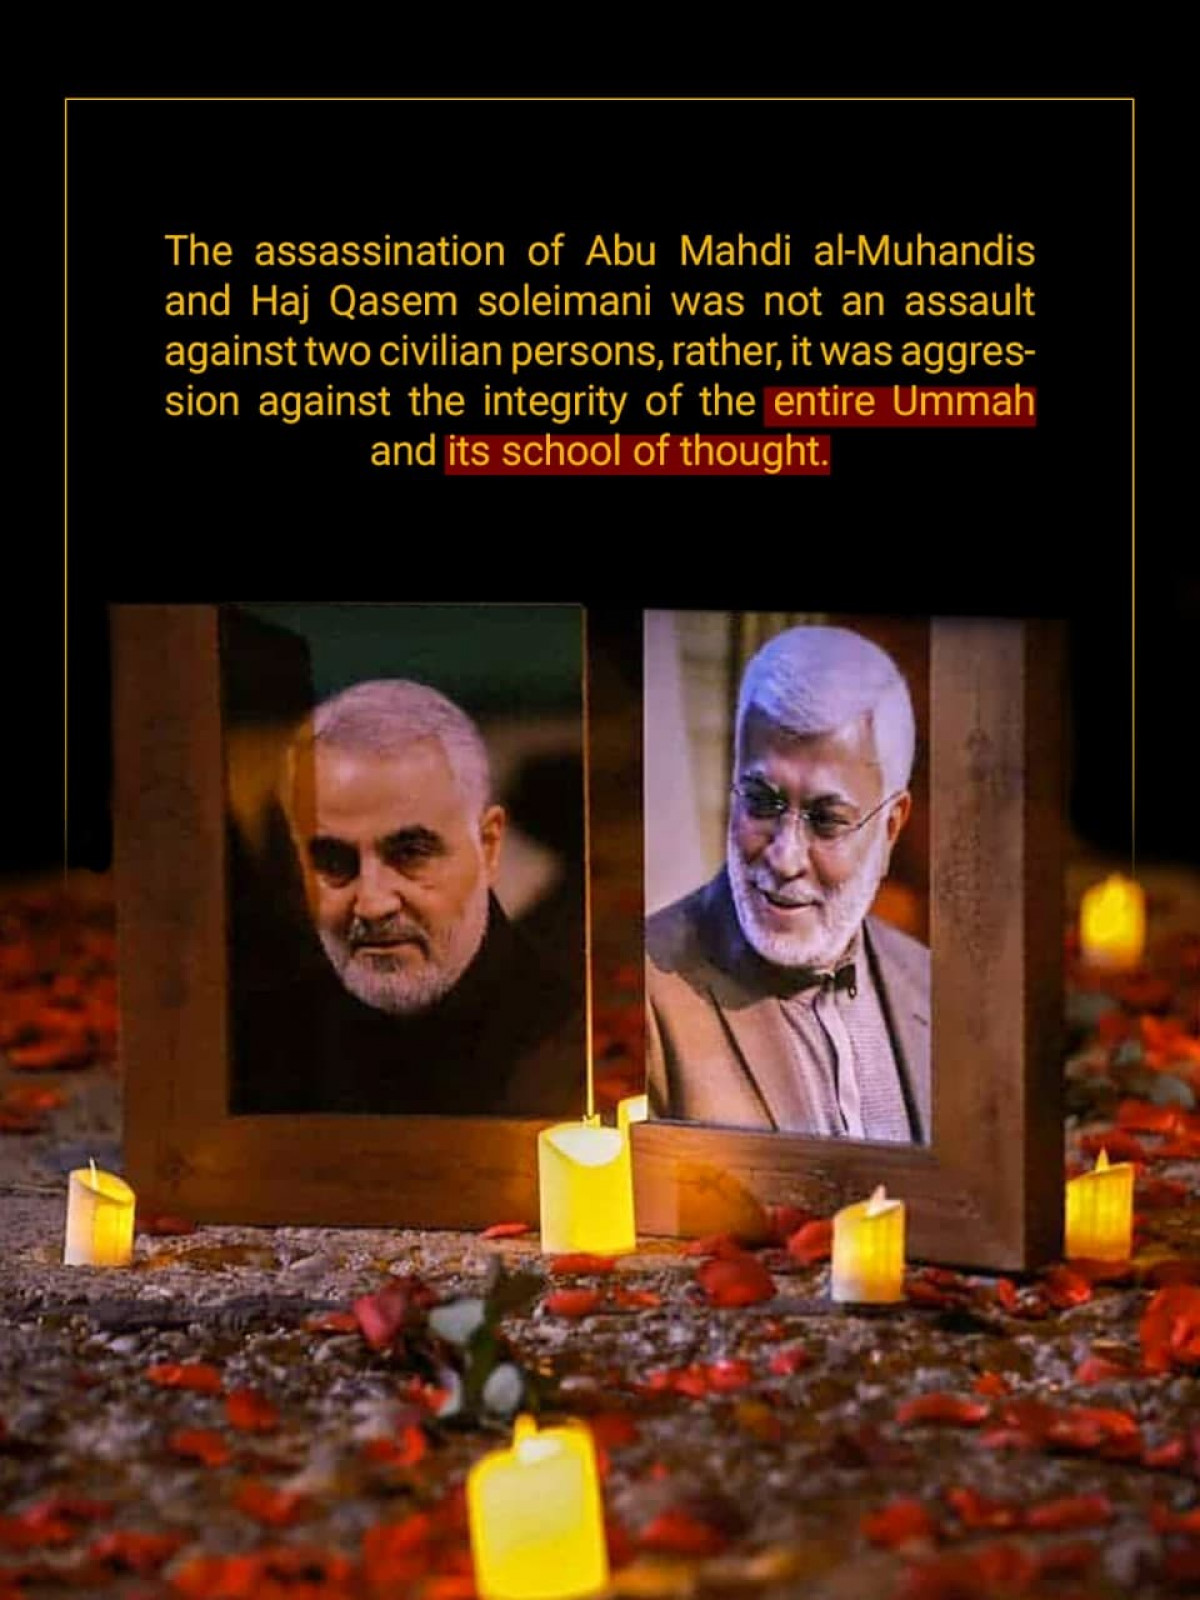 The assassination of Abu Mahdi  and Haj Qasem  was not an assault against two civilian persons